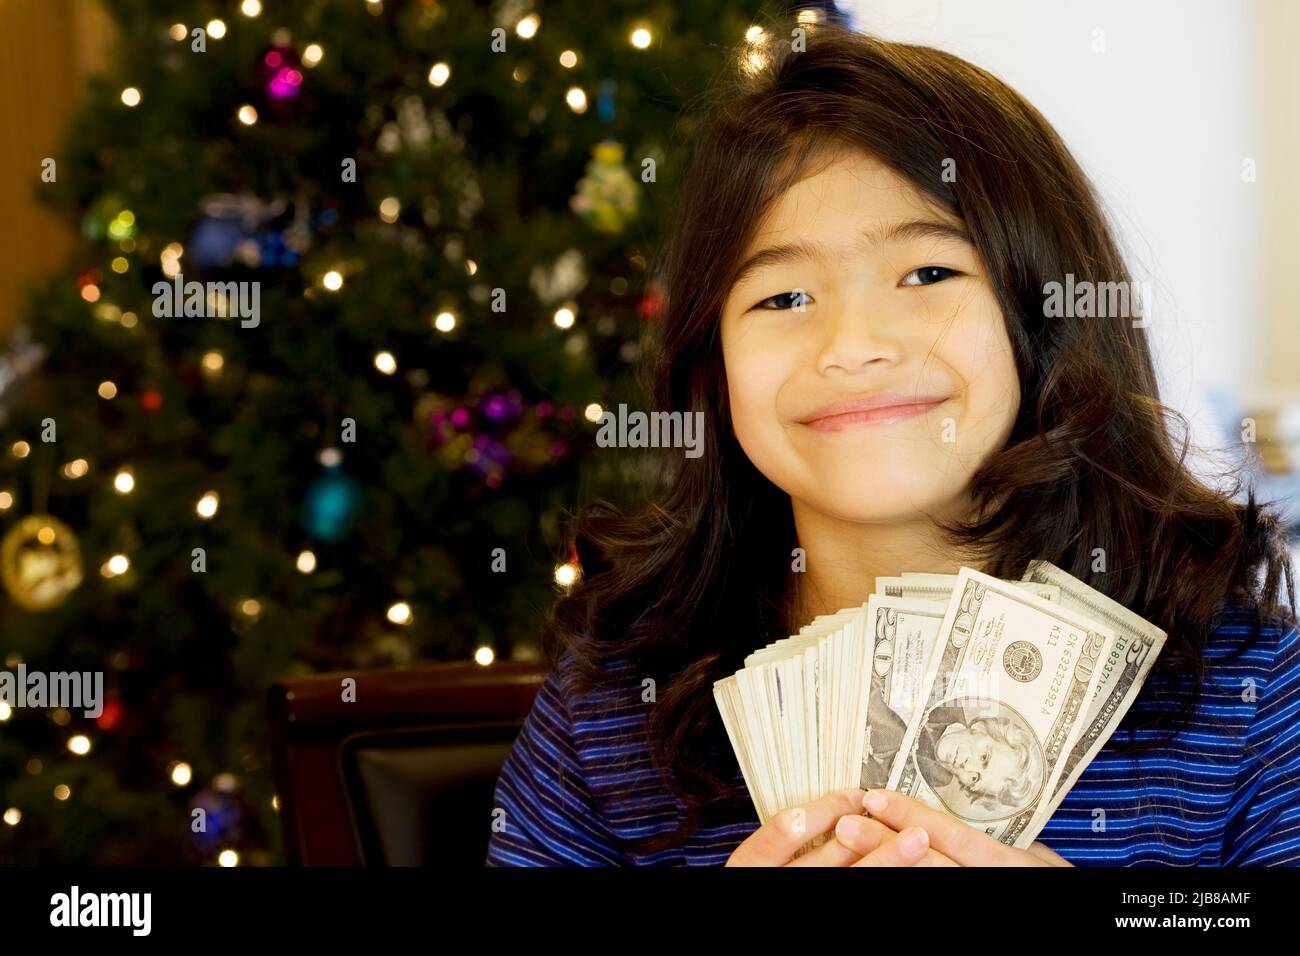 Little girl holding large amount of cash with Christmas tree in background Stock Photo